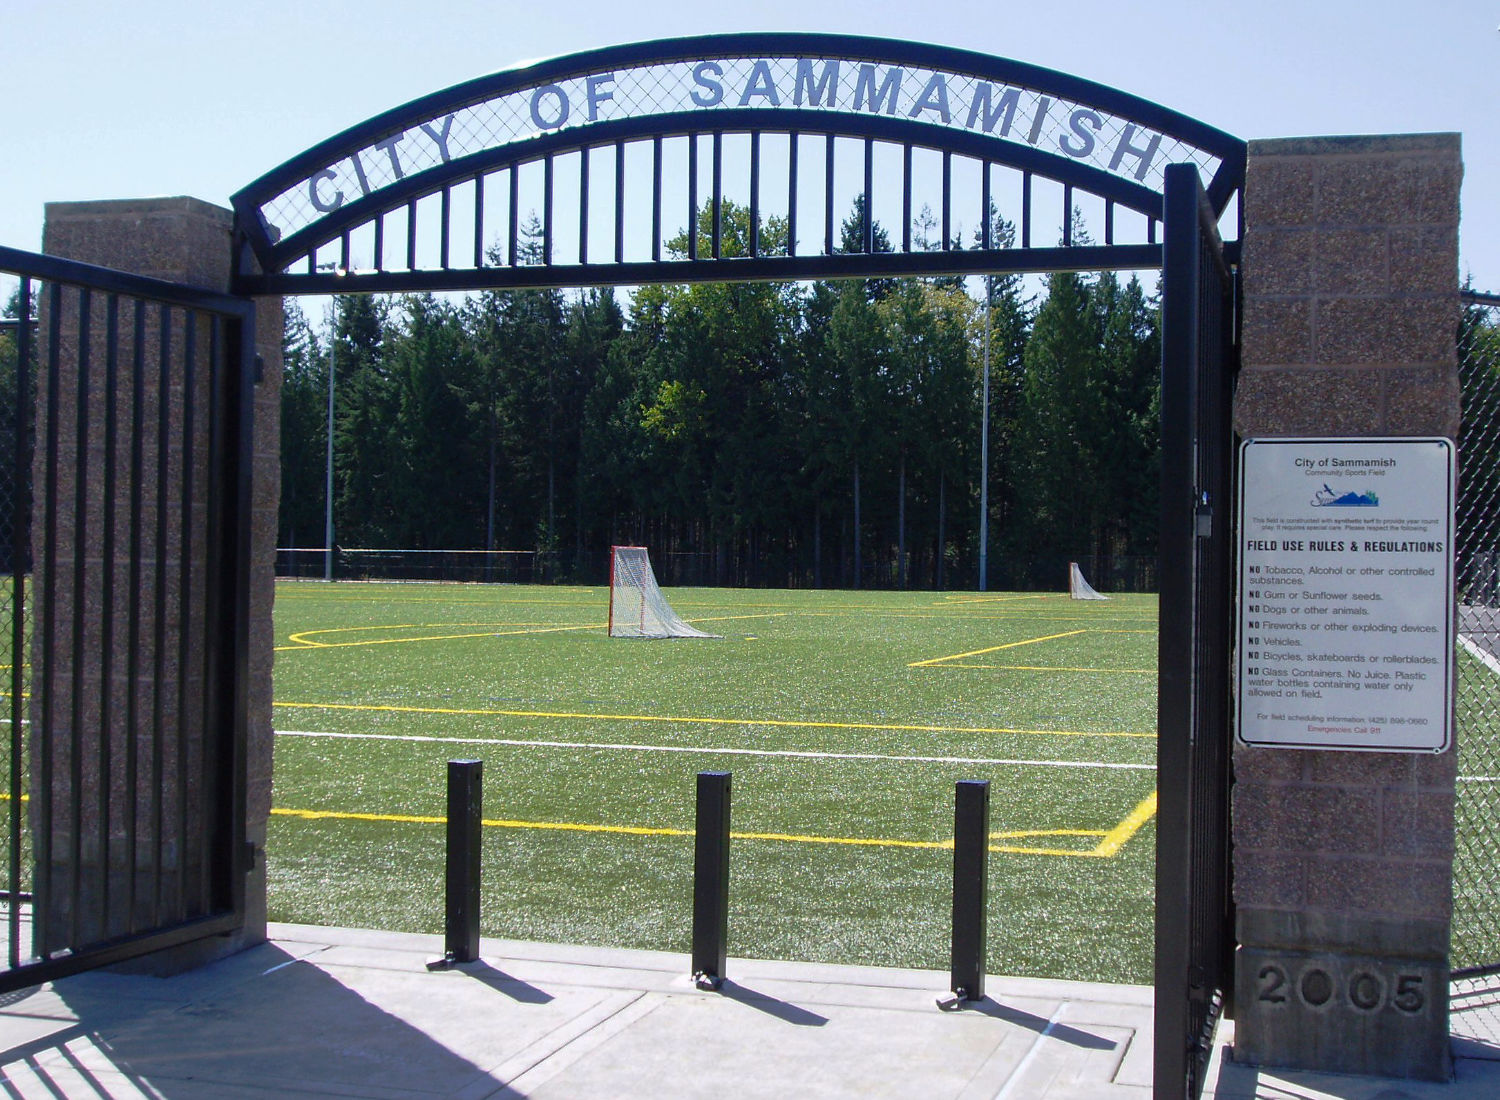 Black iron gate with masonry posts at Eastlake Community Fields opens up to a soccer field